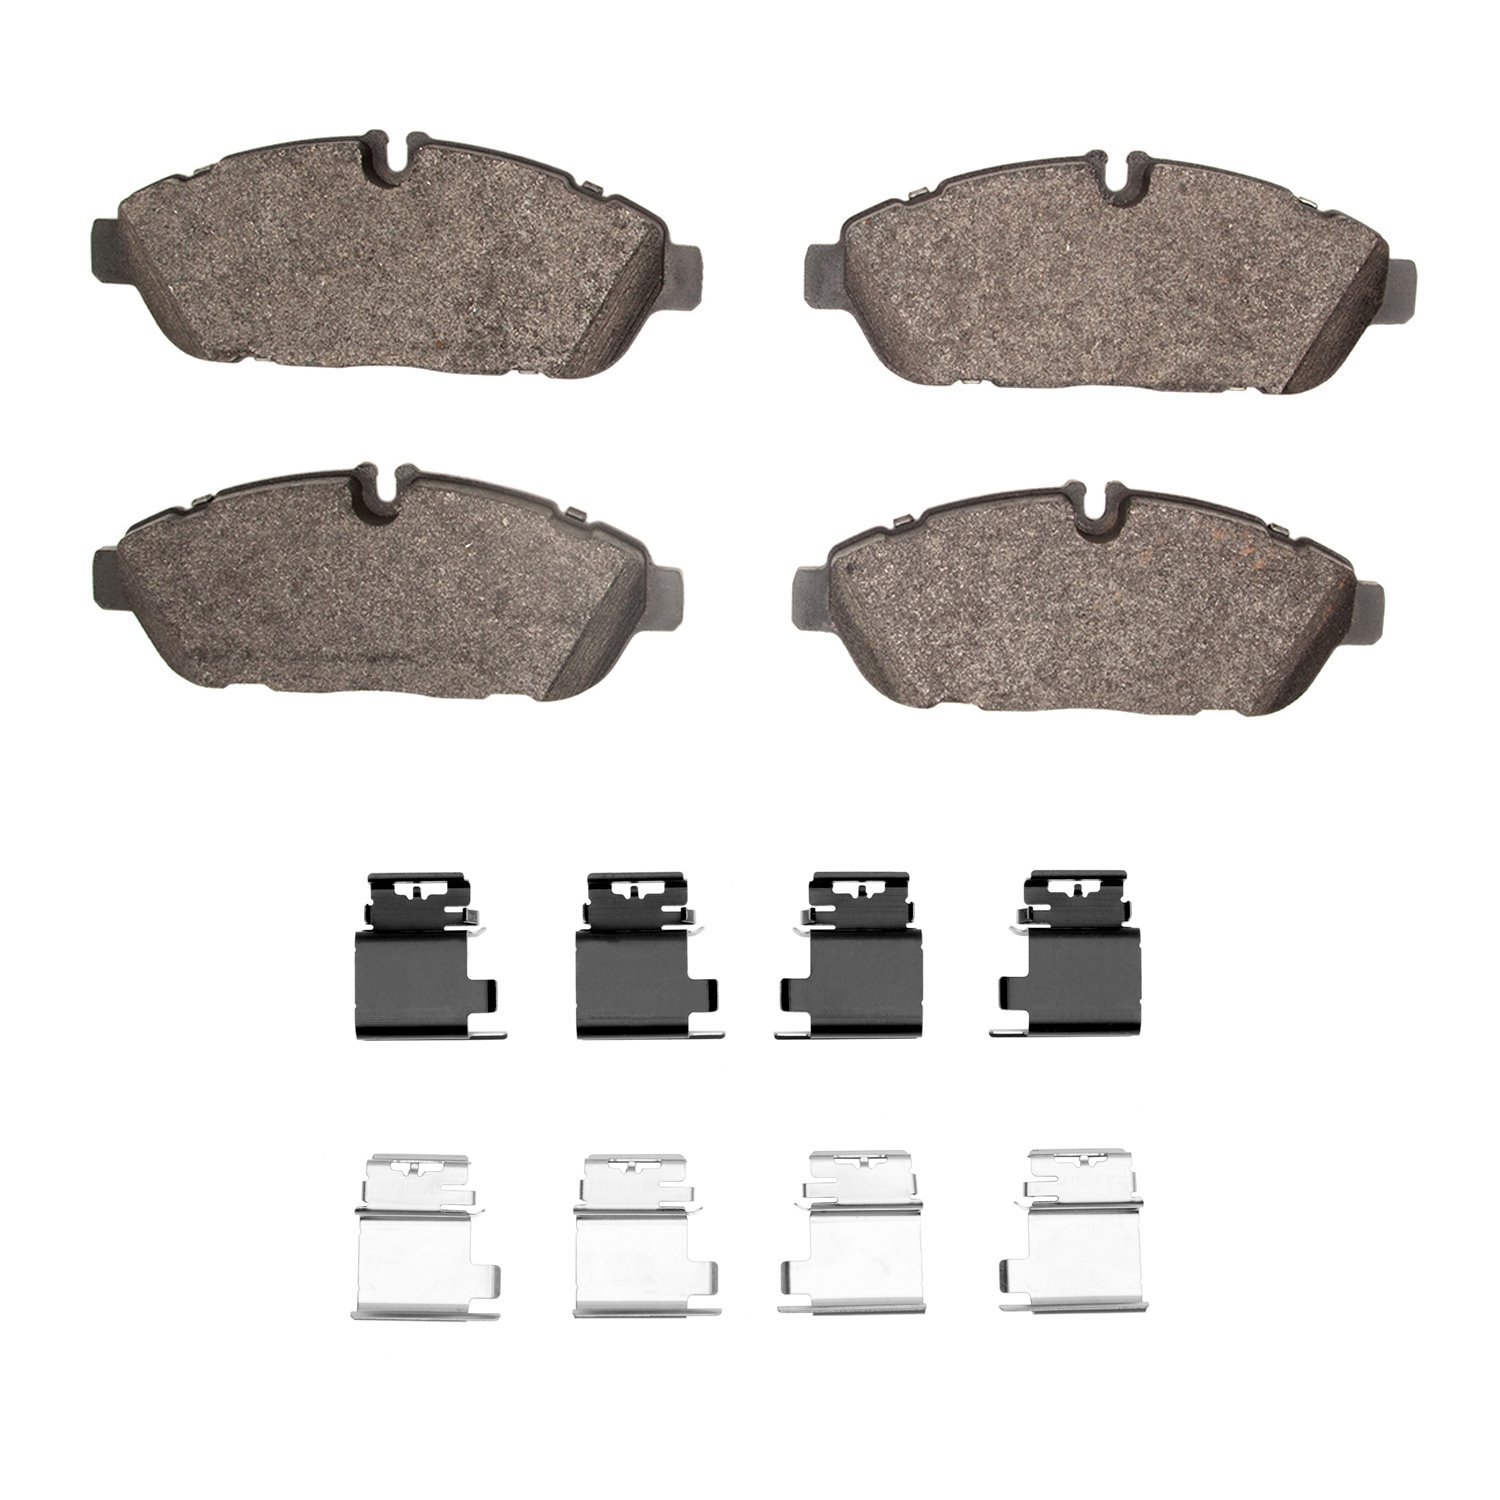 1214-2301-01 Heavy-Duty Brake Pads & Hardware Kit, Fits Select Ford/Lincoln/Mercury/Mazda, Position: Front